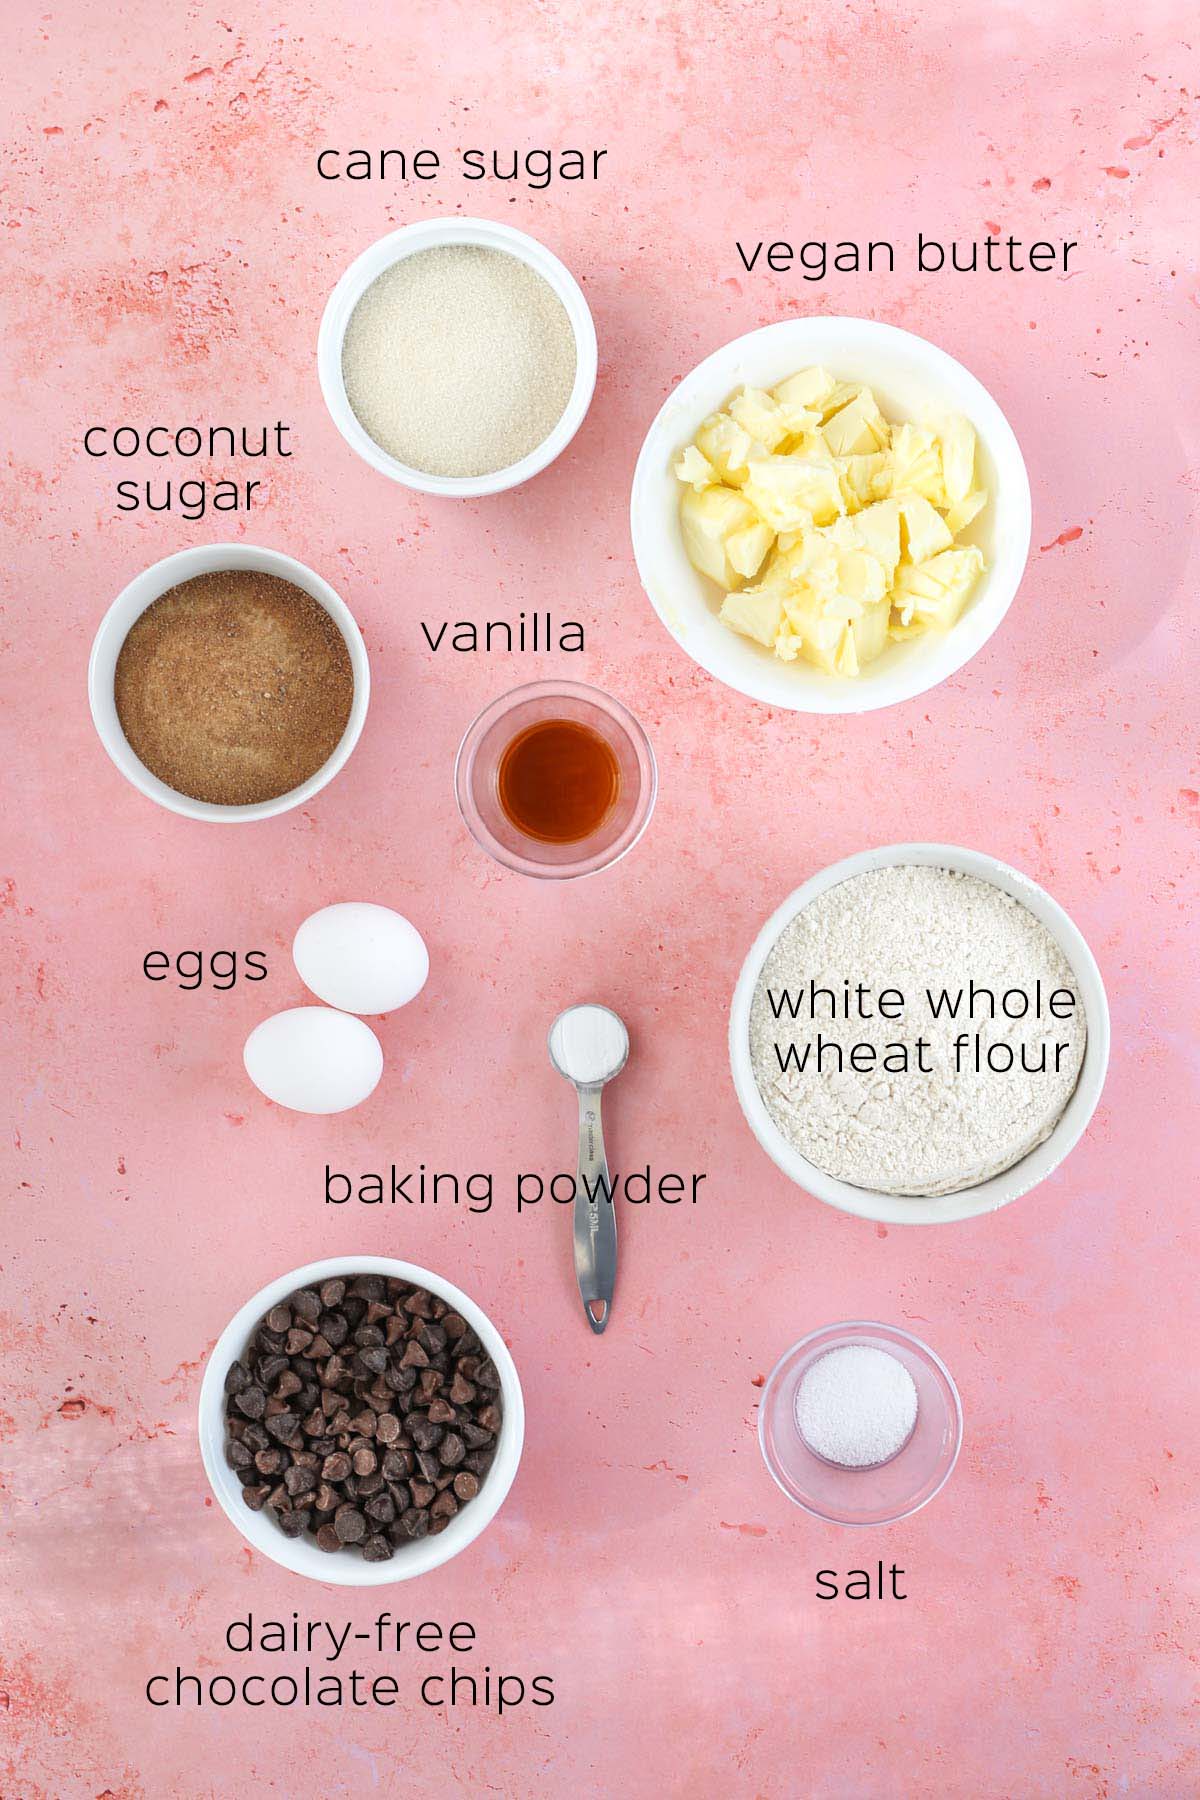 all of the ingredients to make dairy free chocolate chip cookies, set out in small dishes on a pink surface.